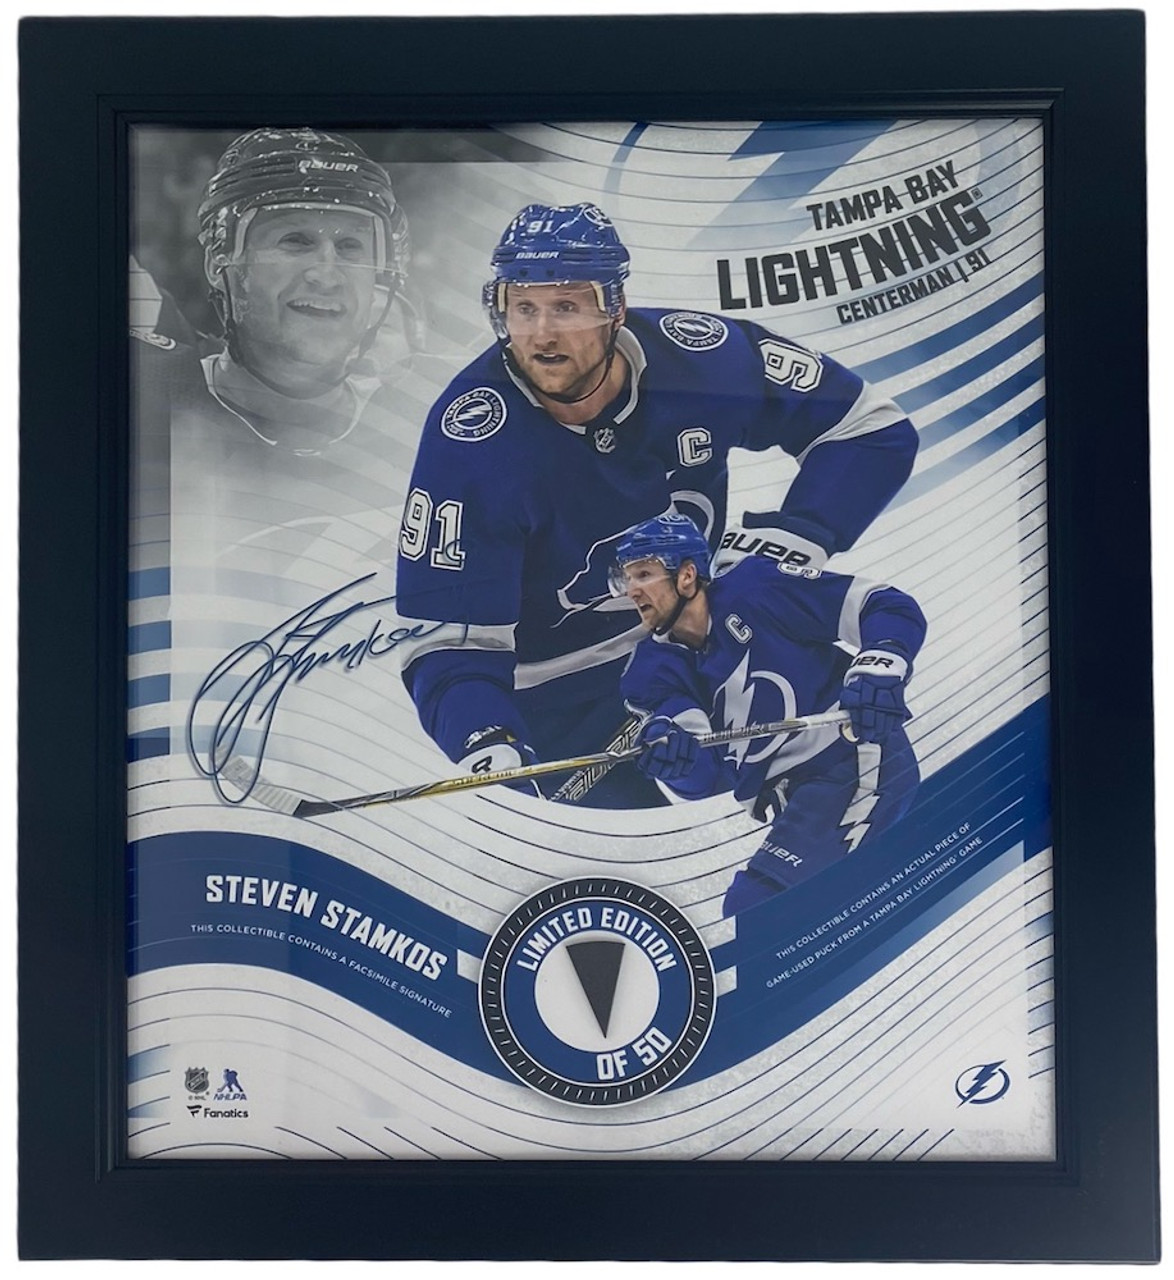 Tampa Bay Lightning - It's STAMMERTIME! Steven Stamkos makes his return  tonight at the Tampa Bay Times Forum. Want the chance to win this  autographed jersey? Comment to tell us why it